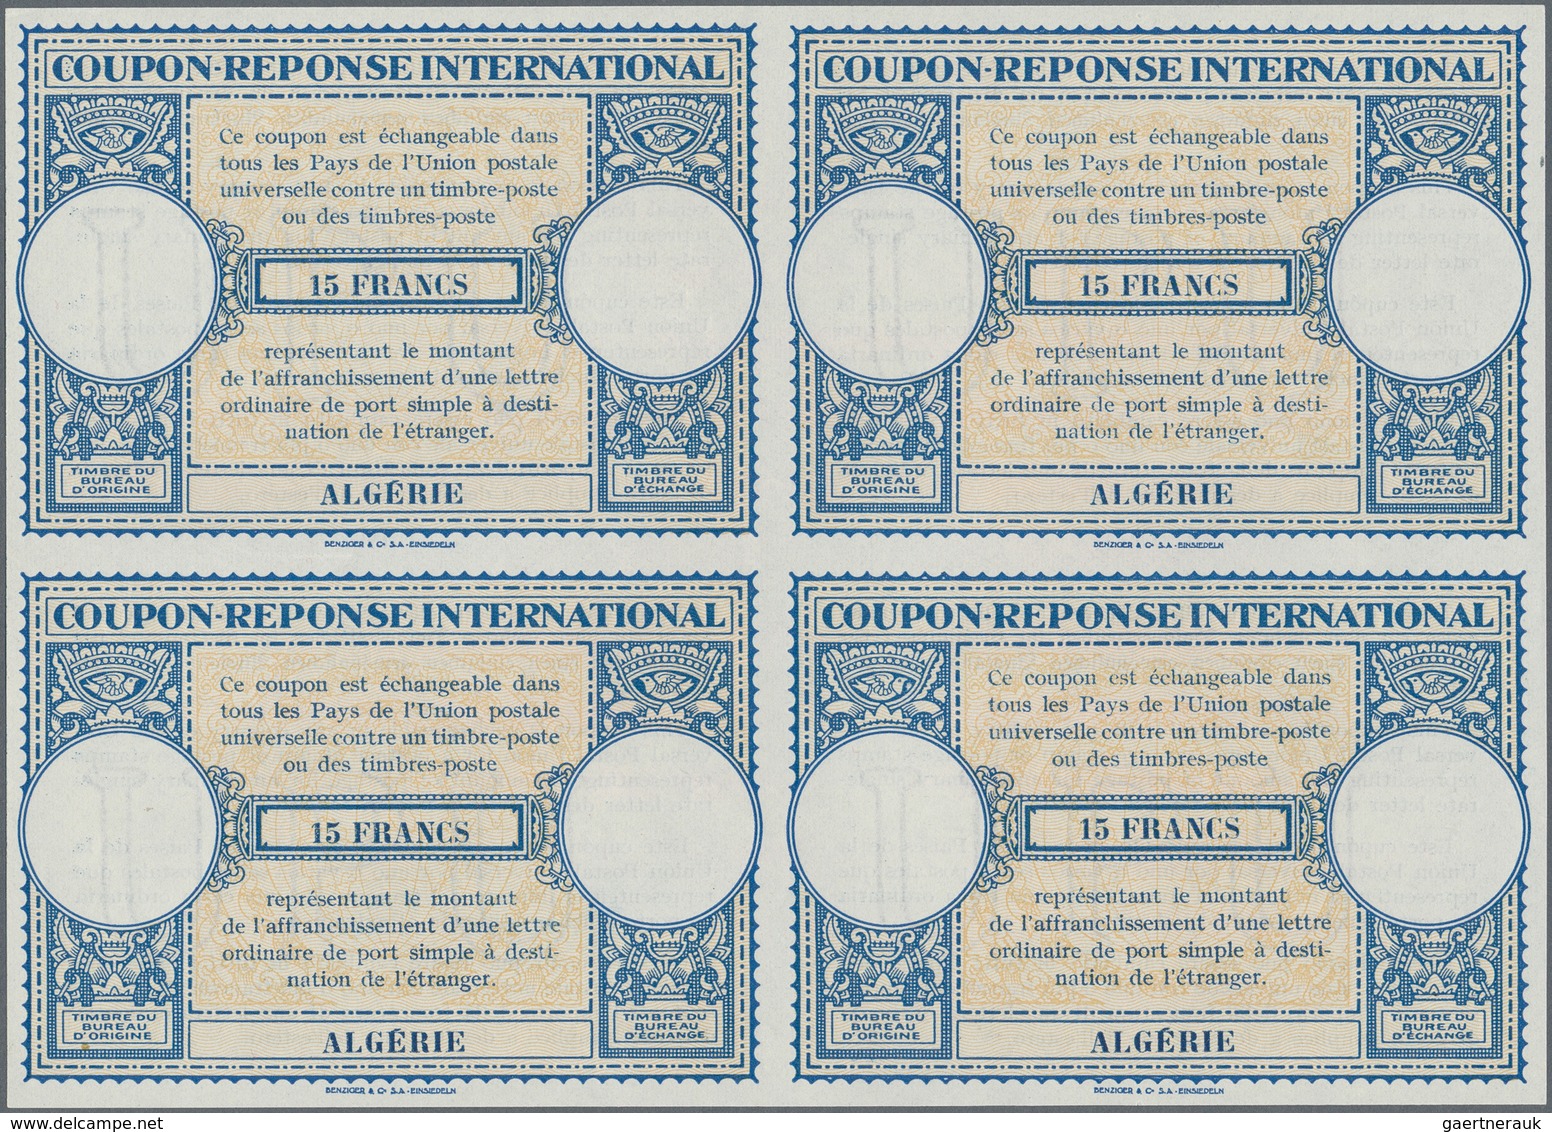 Algerien: 1940s/1950s (approx). International Reply Coupon 15 Francs (London Type) In An Unused Bloc - Lettres & Documents